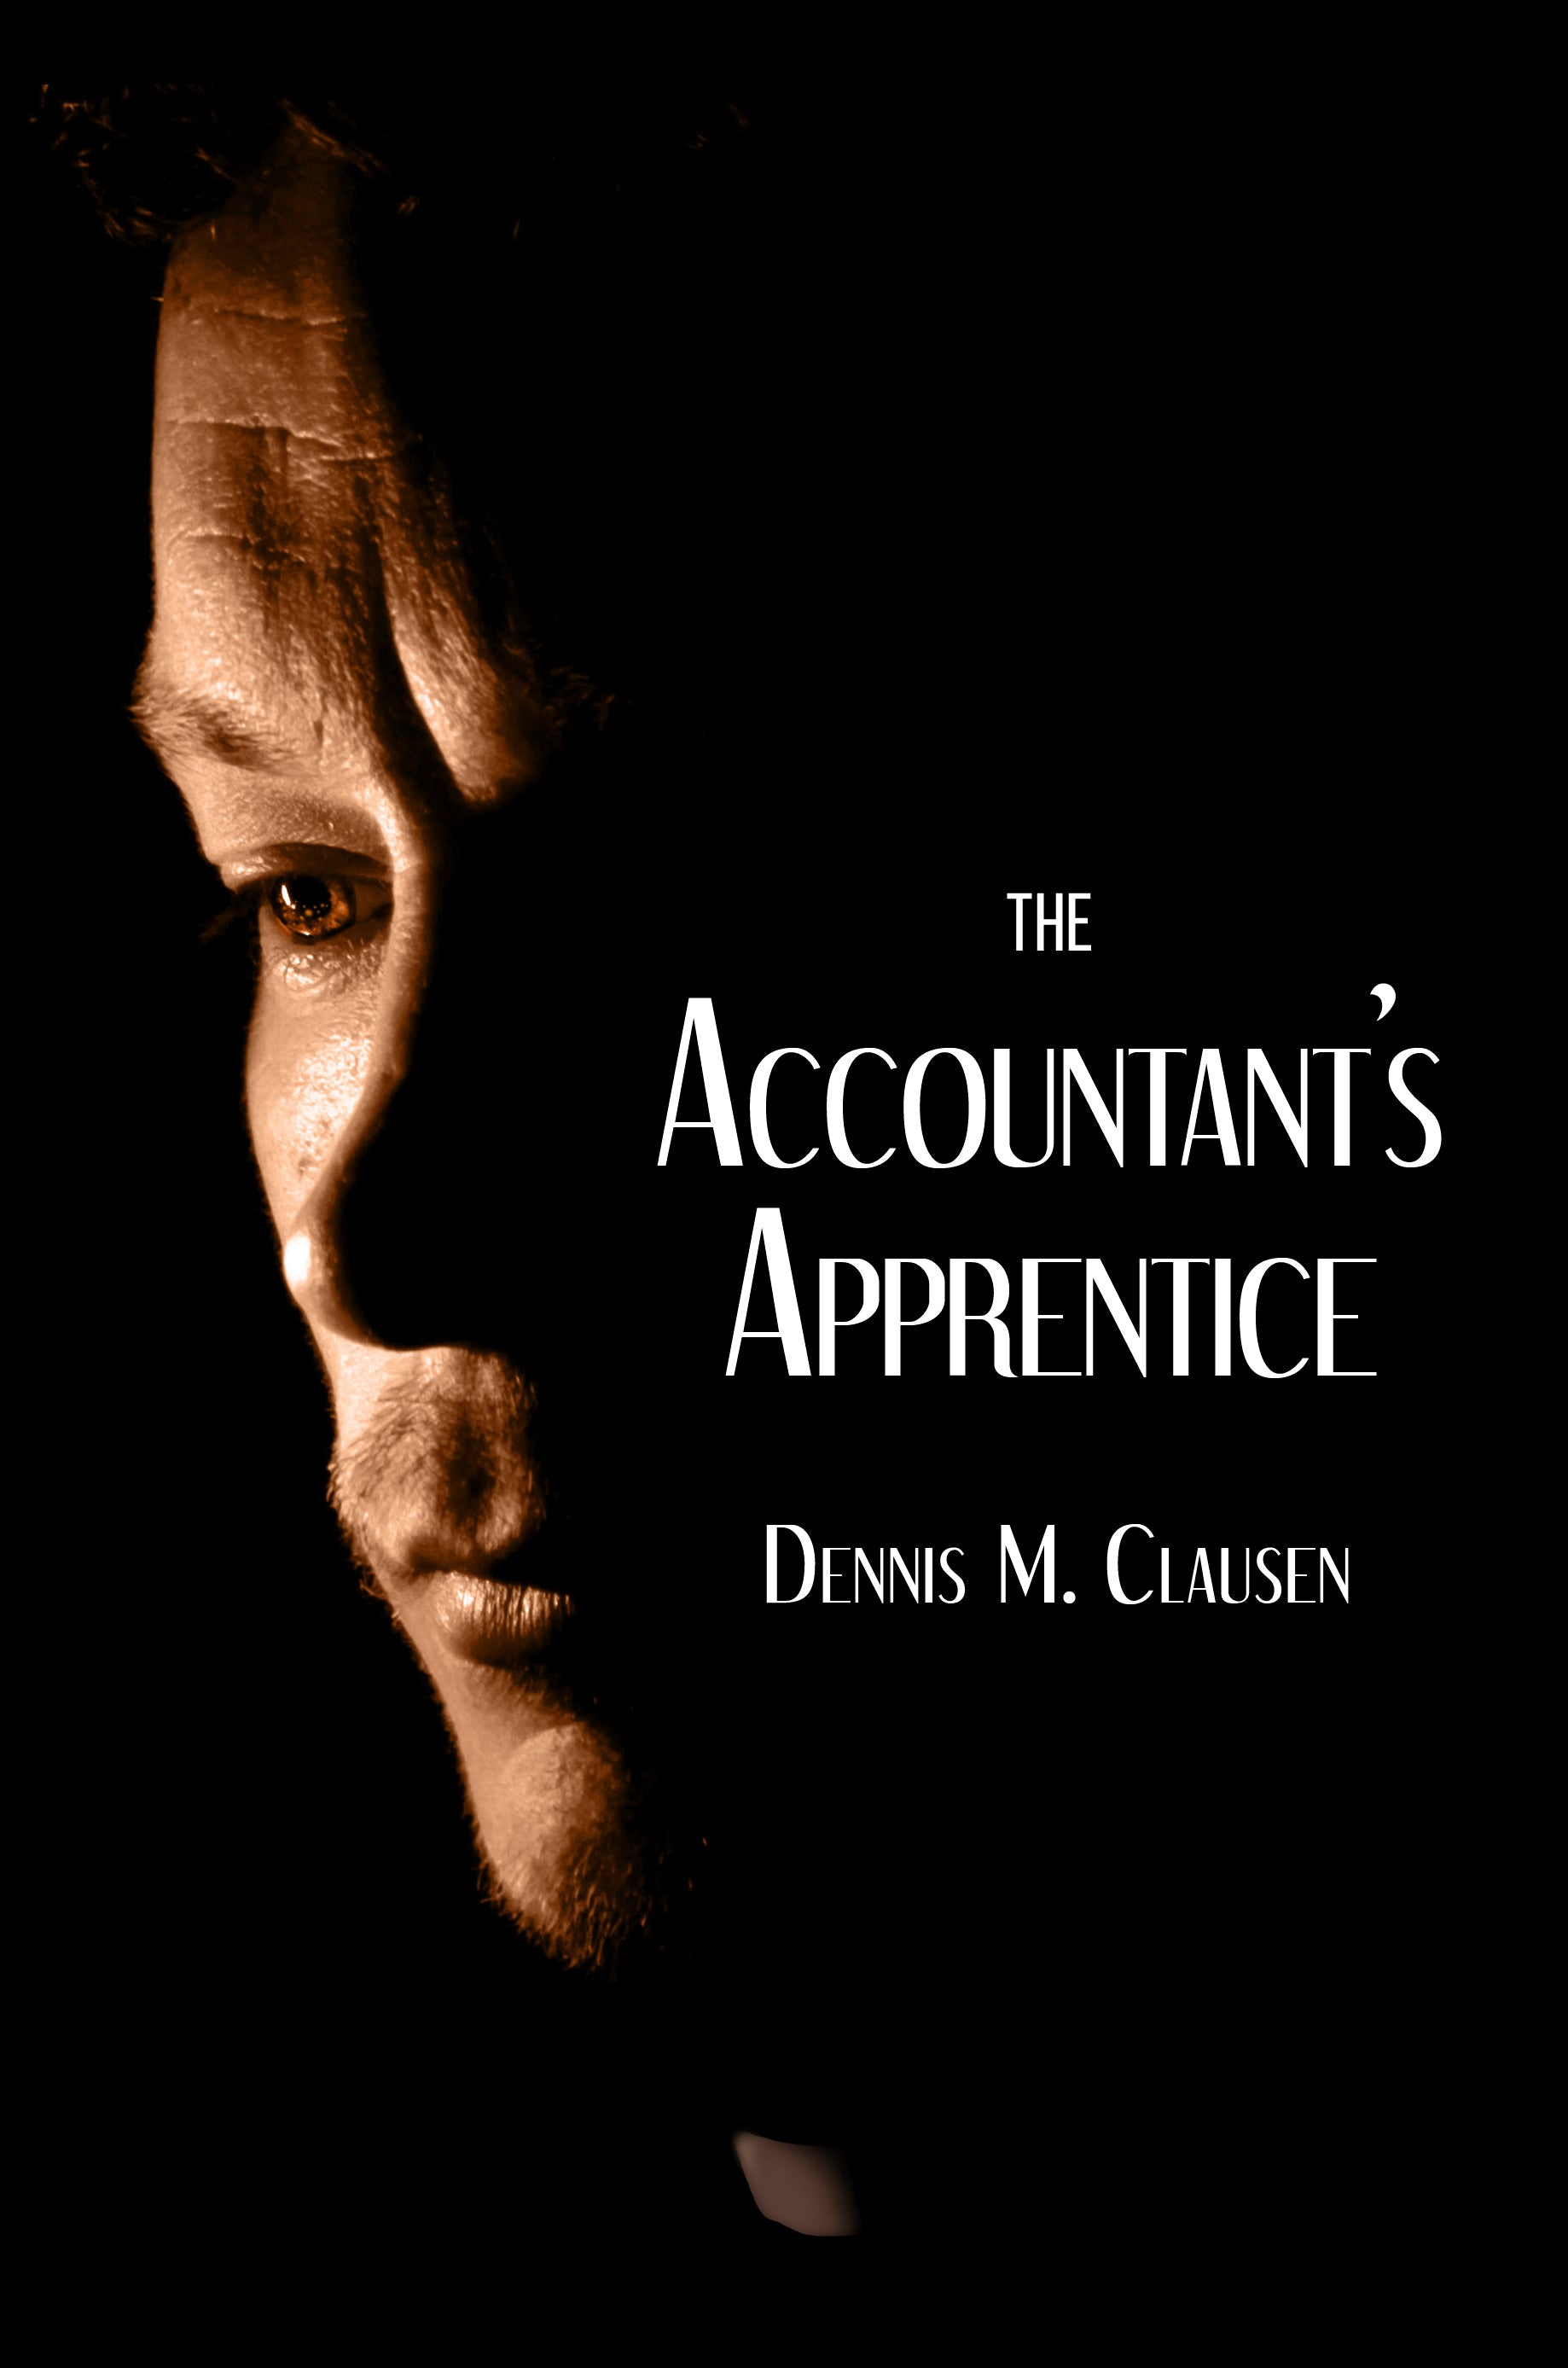 "The Accountant's Apprentice” by Dennis Clausen wins the Sunny Award for Brown Posey Press Bestseller in 2018